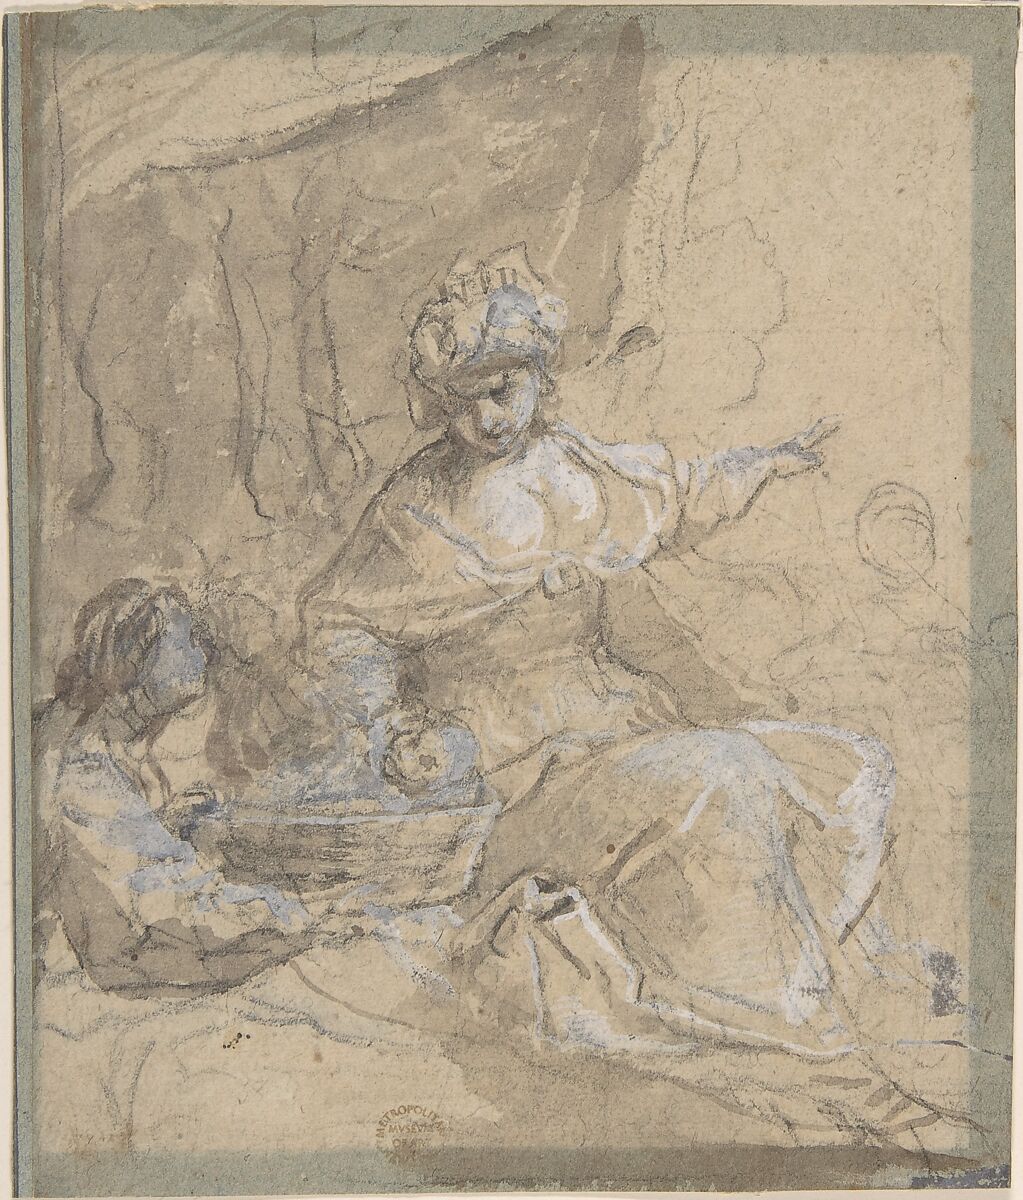 The Finding of Moses, Anonymous, Italian, Roman-Bolognese, 17th century, Brush and brown wash over black chalk, highlighted with white gouache on blue-brown paper, faded to light tan 